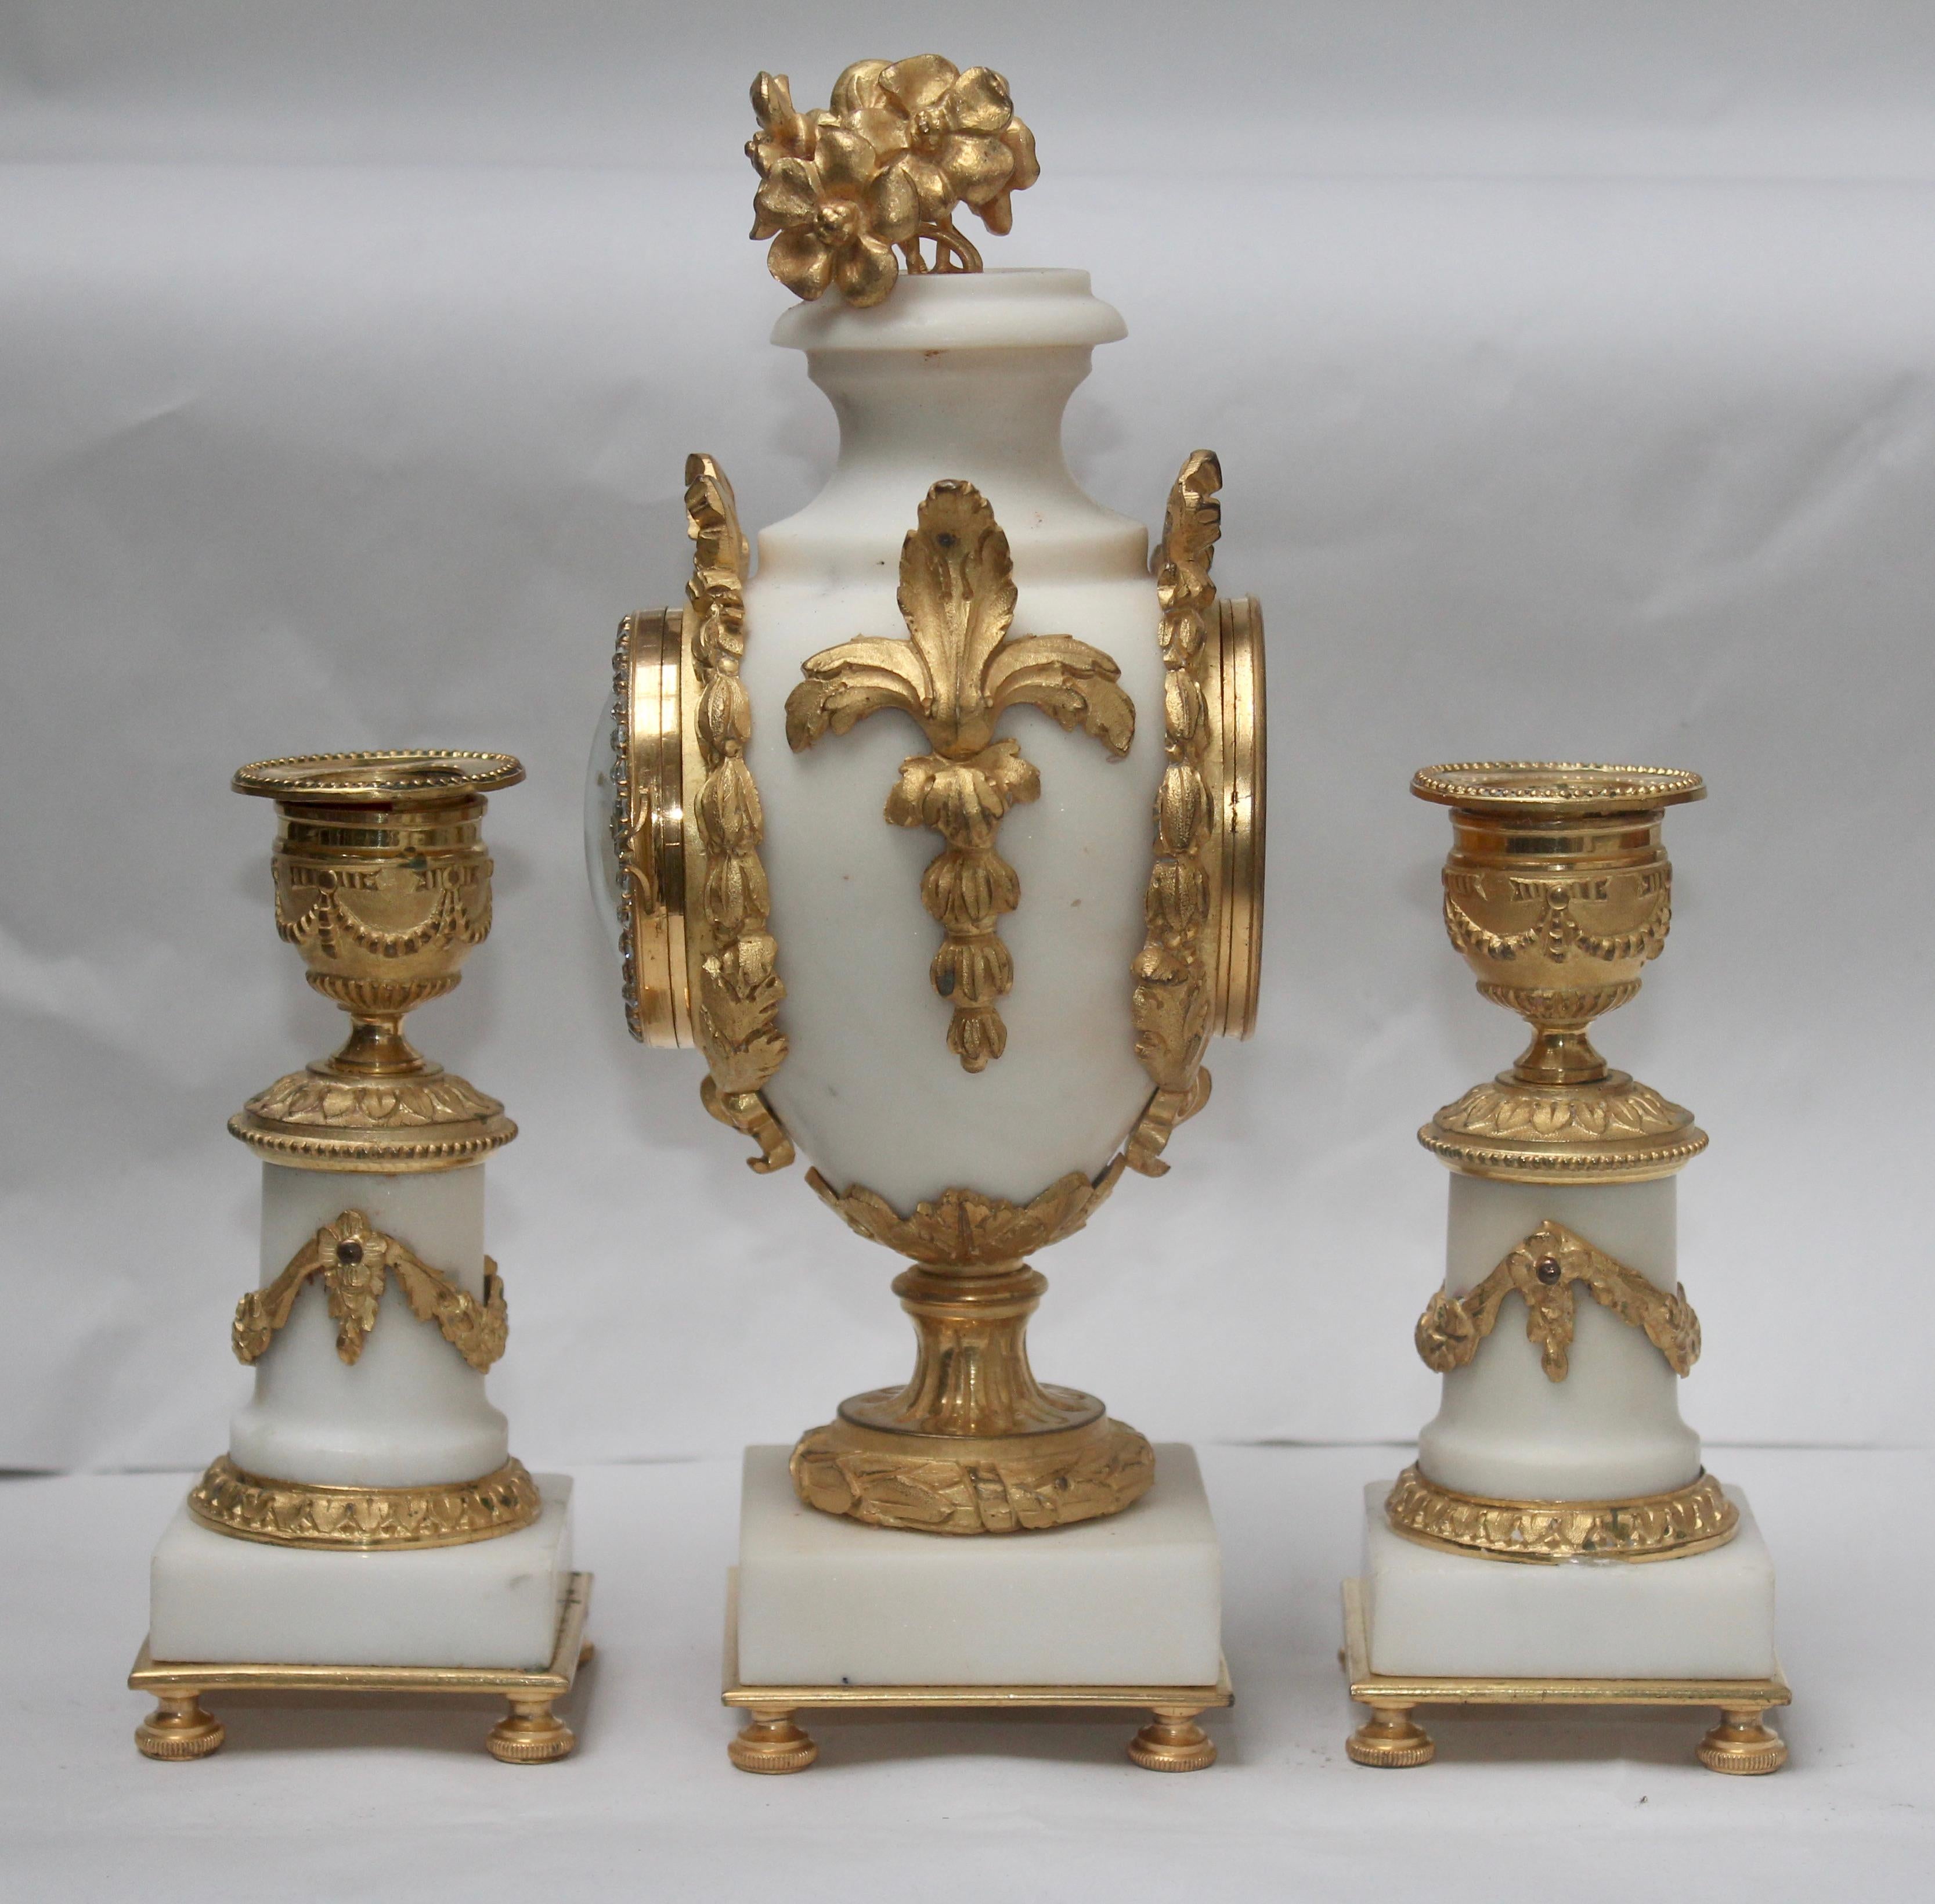 Louis XVI French Ormolu and White Marble Three-Pieces Vase Shaped Clock Garniture